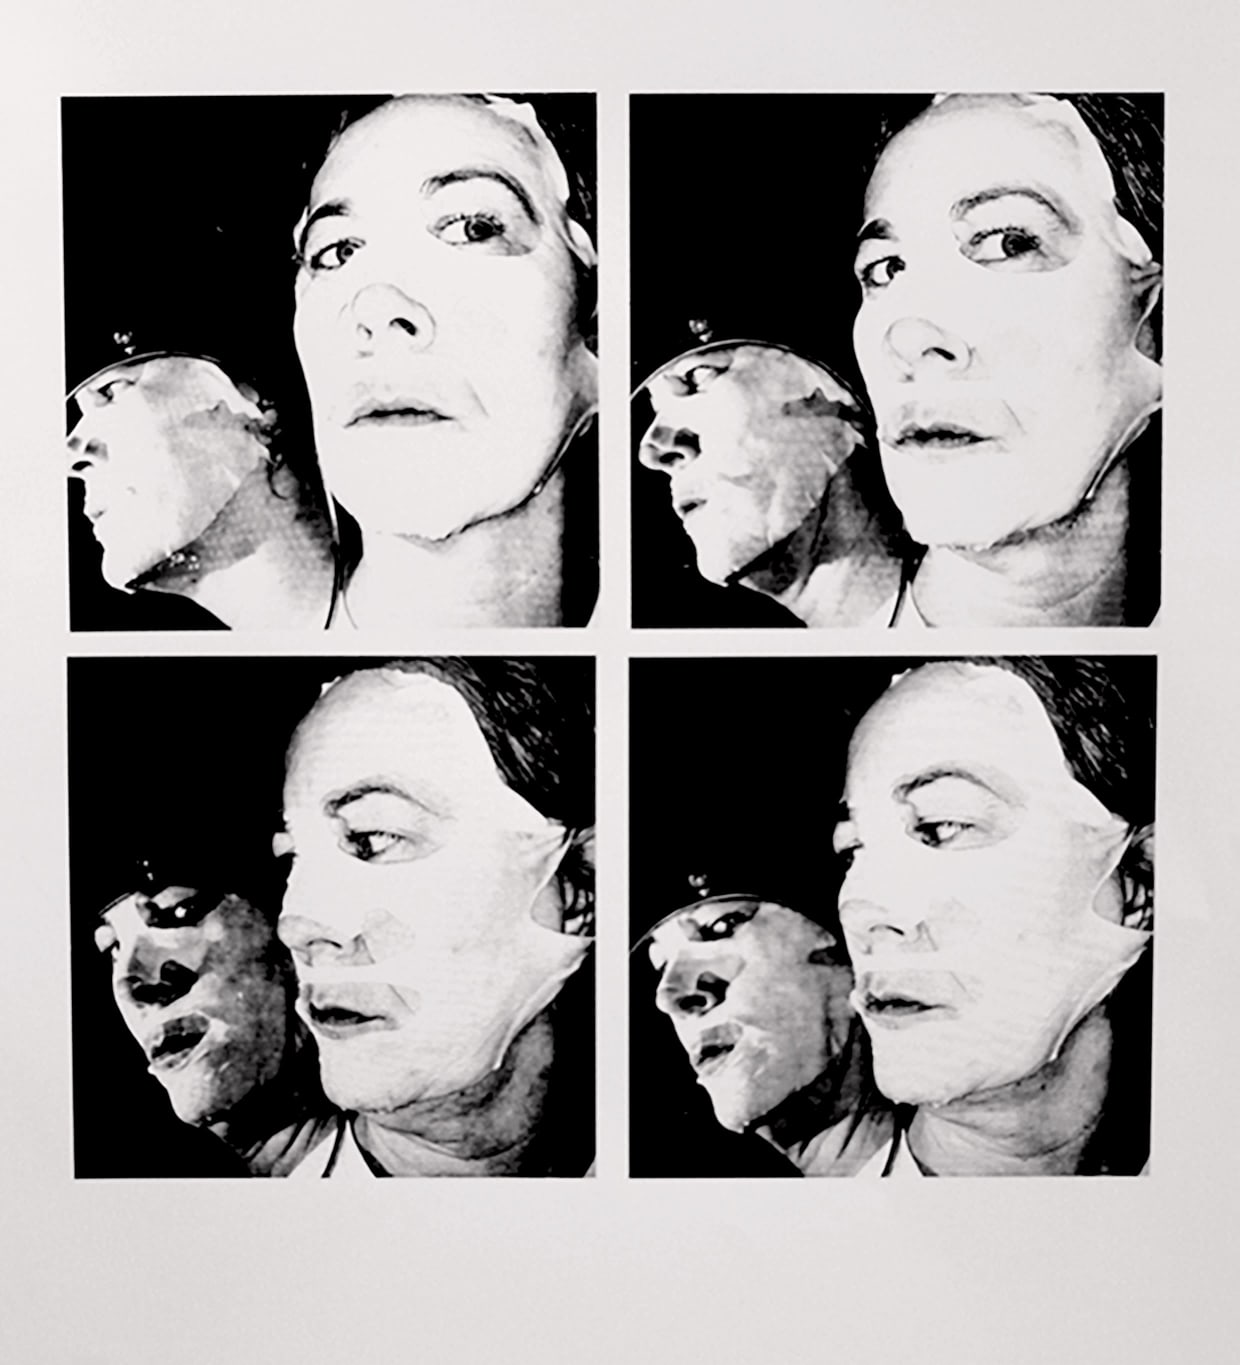 A set of four black and white photographs arranged in a square of white card. In each photo a mirror is held up to the side of a woman’s face, so that her reflection, which is shown in the image, appears to look towards us or away in relation to the mirror.